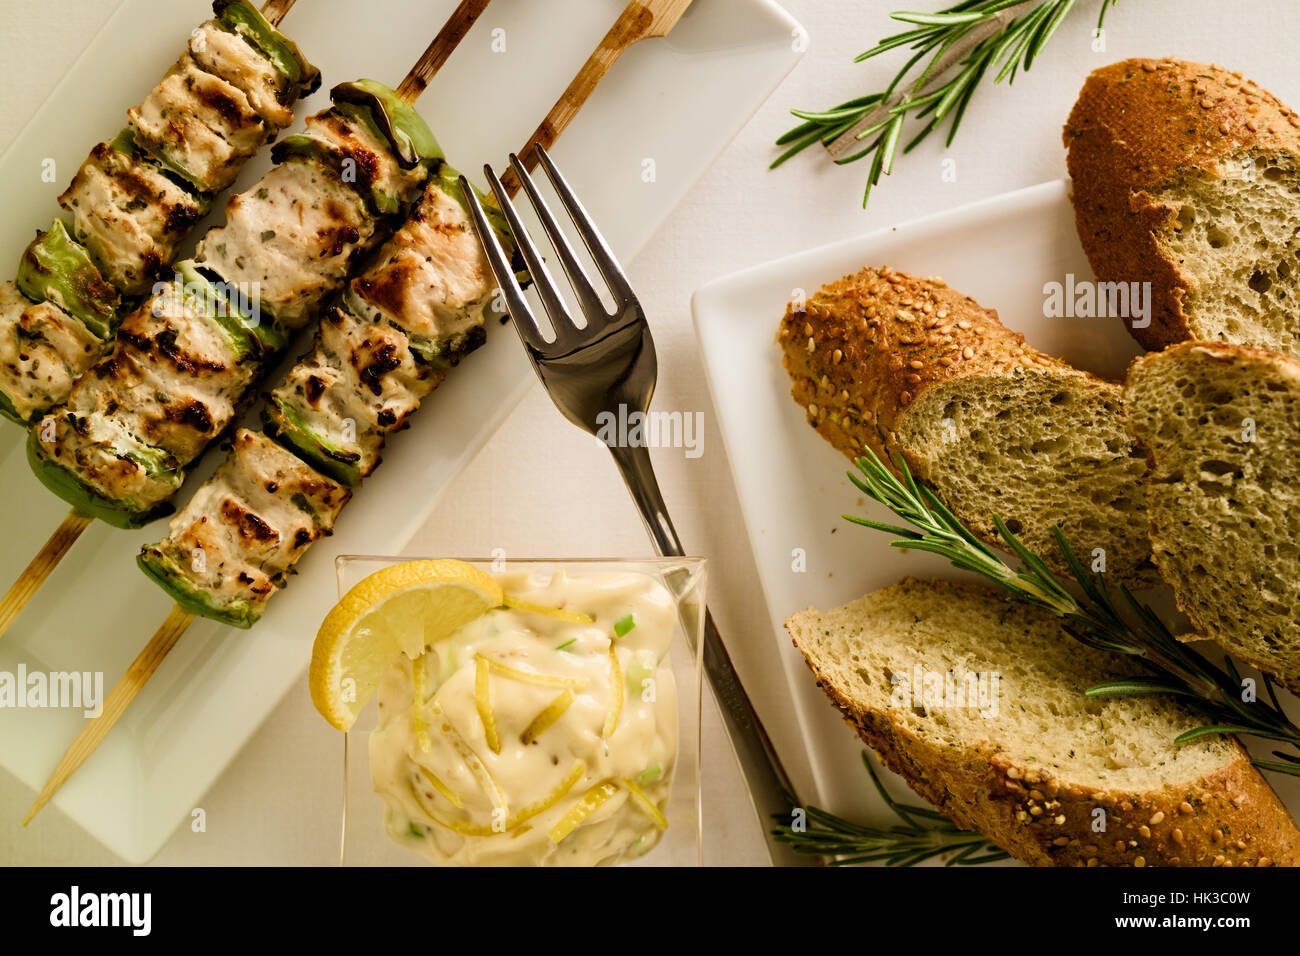 Barbeque Grilled chicken and peppers on skewer served on rectangular plate  in restaurant setting with Macedoine dipping sauce and bread Stock Photo -  Alamy